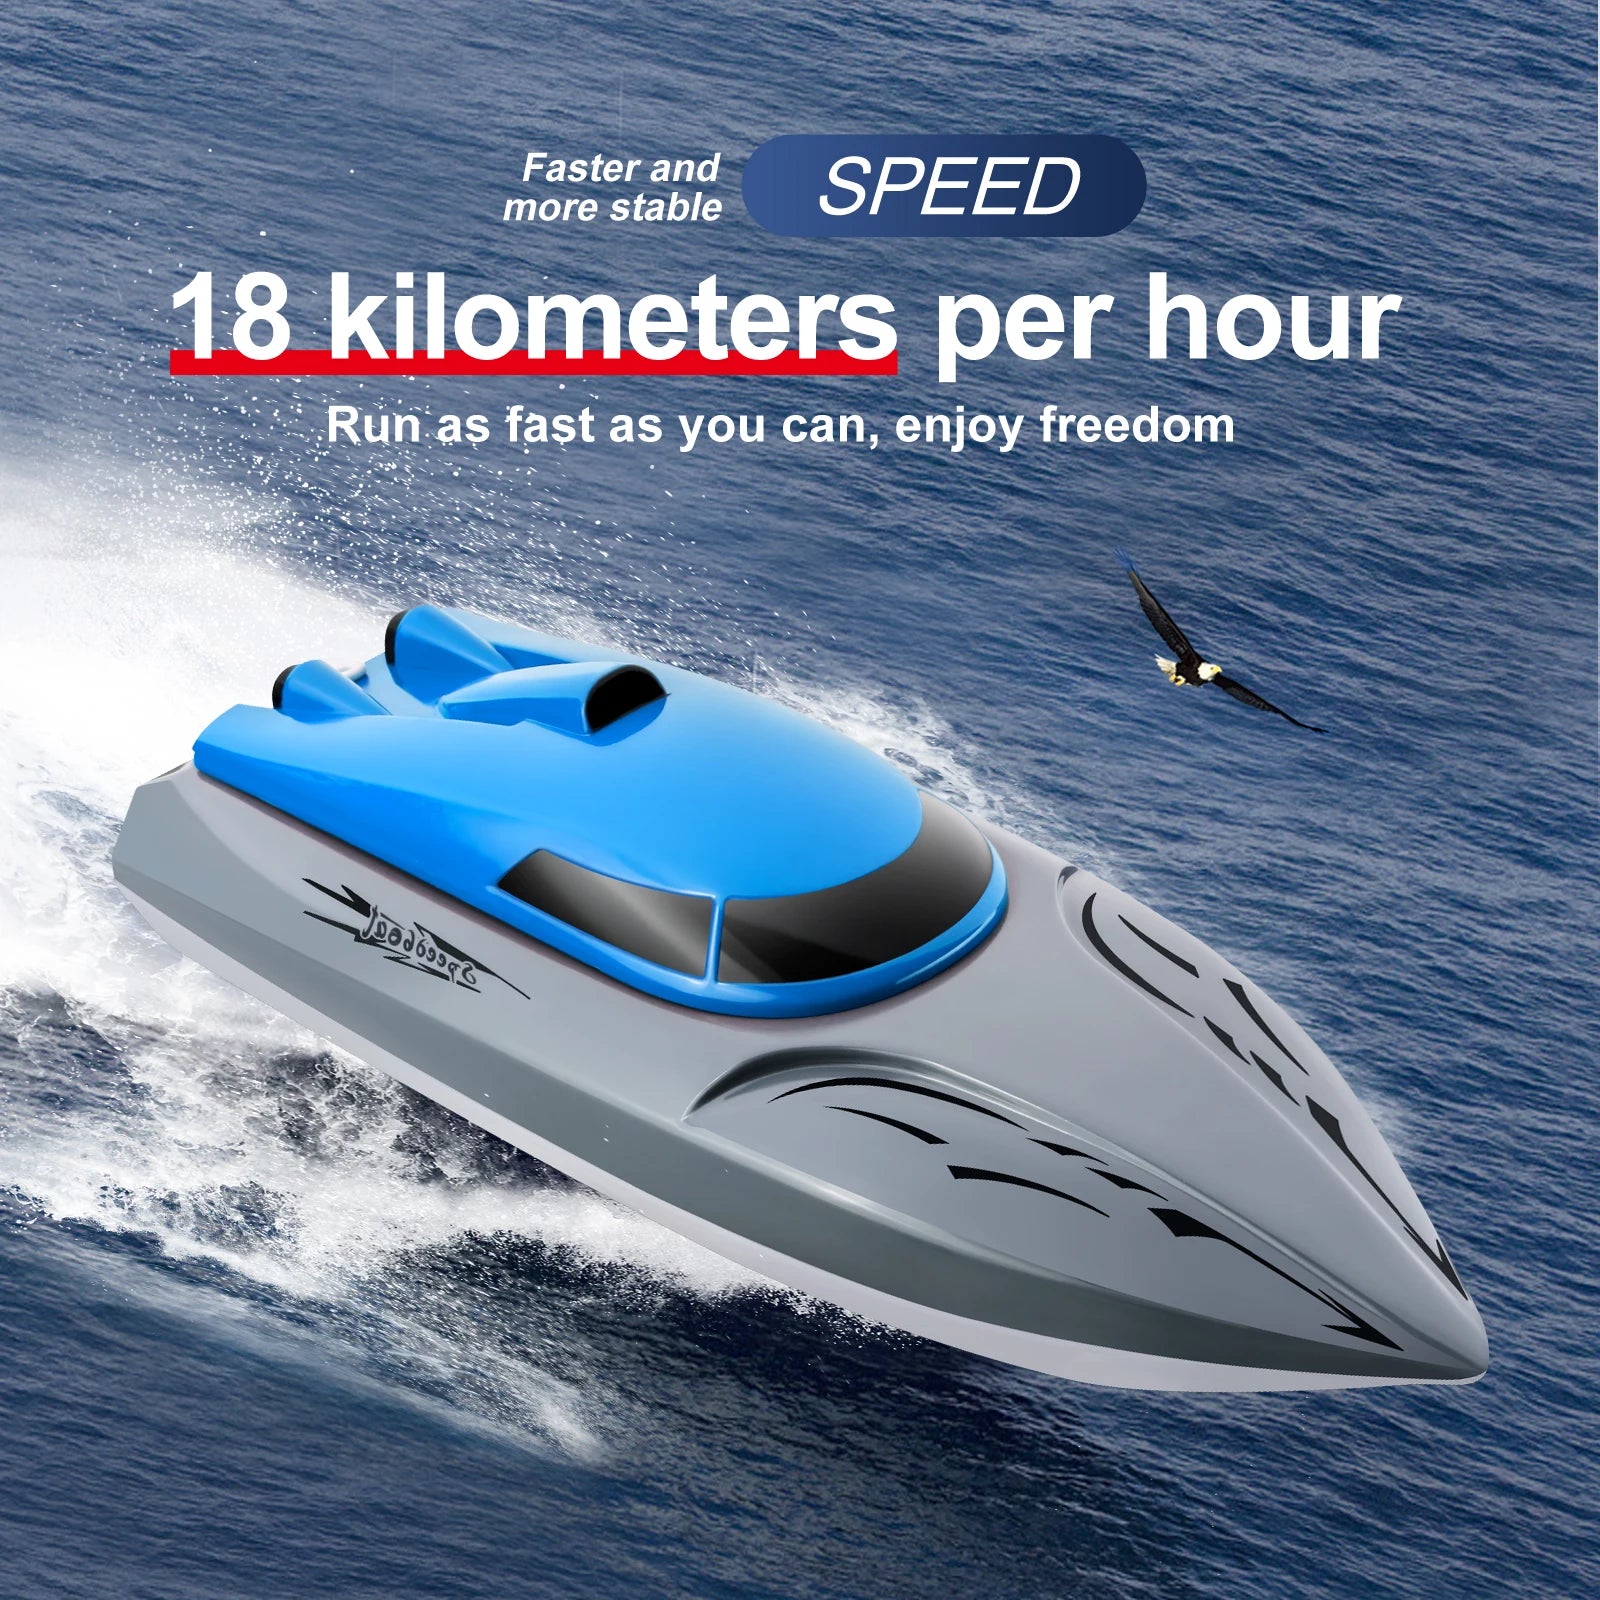 Rc Boat, Faster and SPEED more stable 18 kilometers per hour Run as fast as you can,